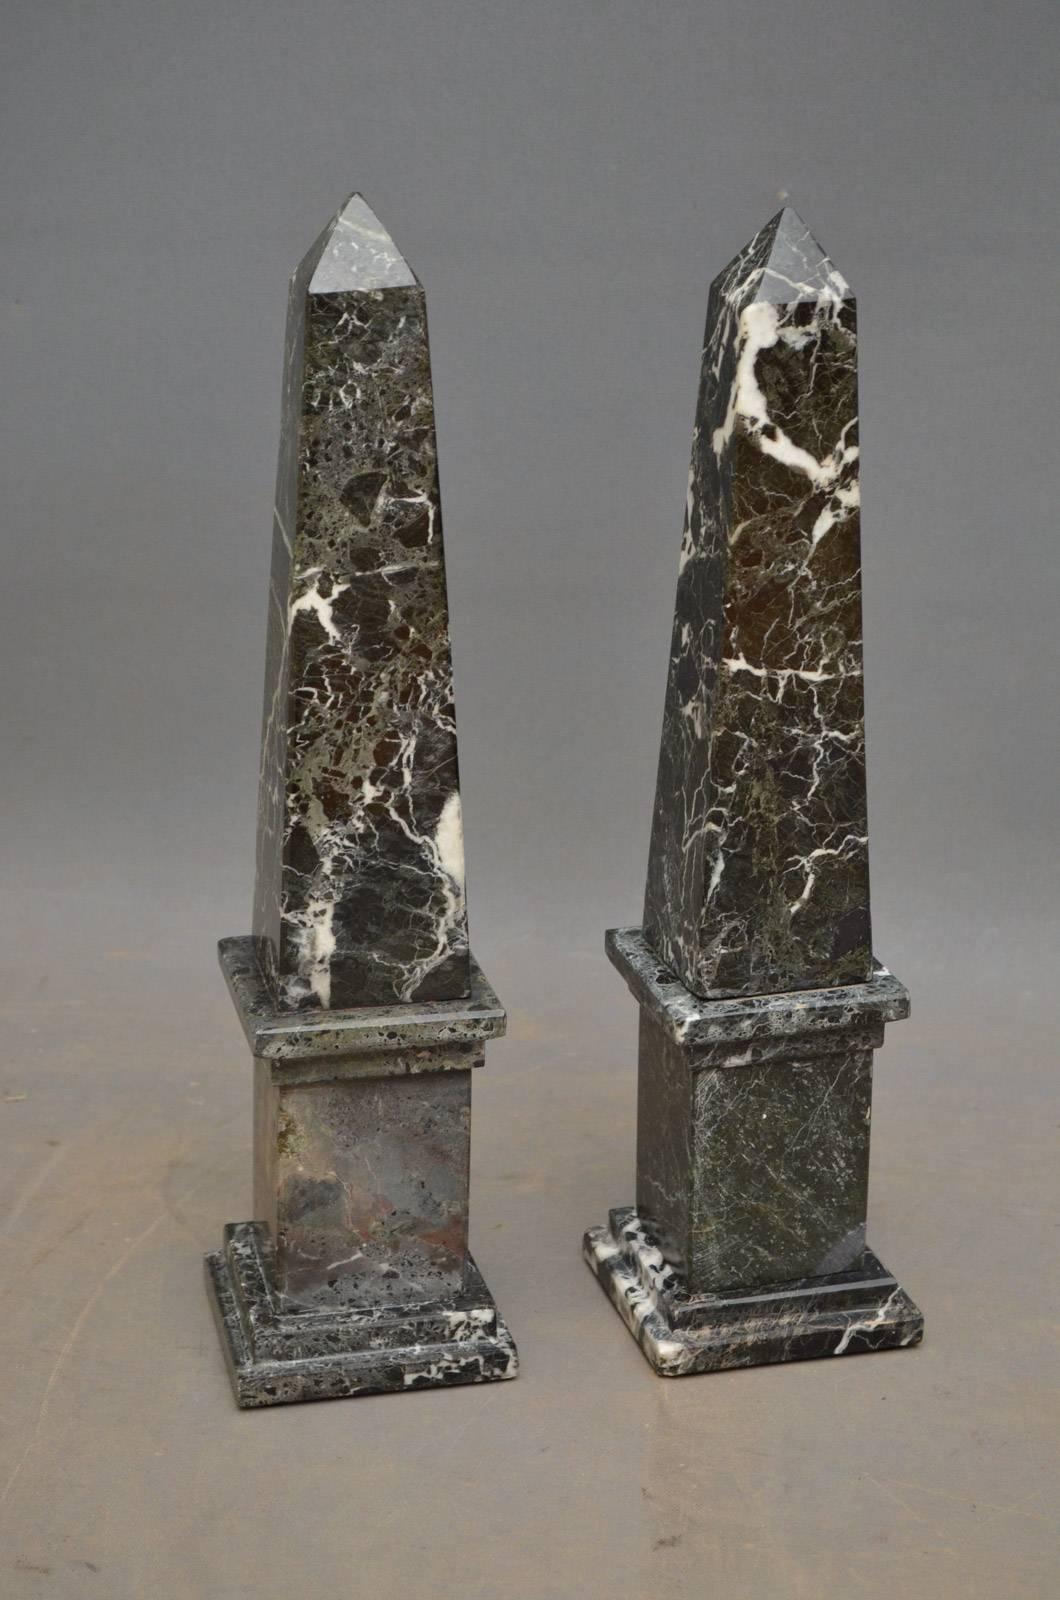 K0285 Excellent pair of very stylish back - green marble obelisks. Early mid-20th century.
Measures: H 19.5